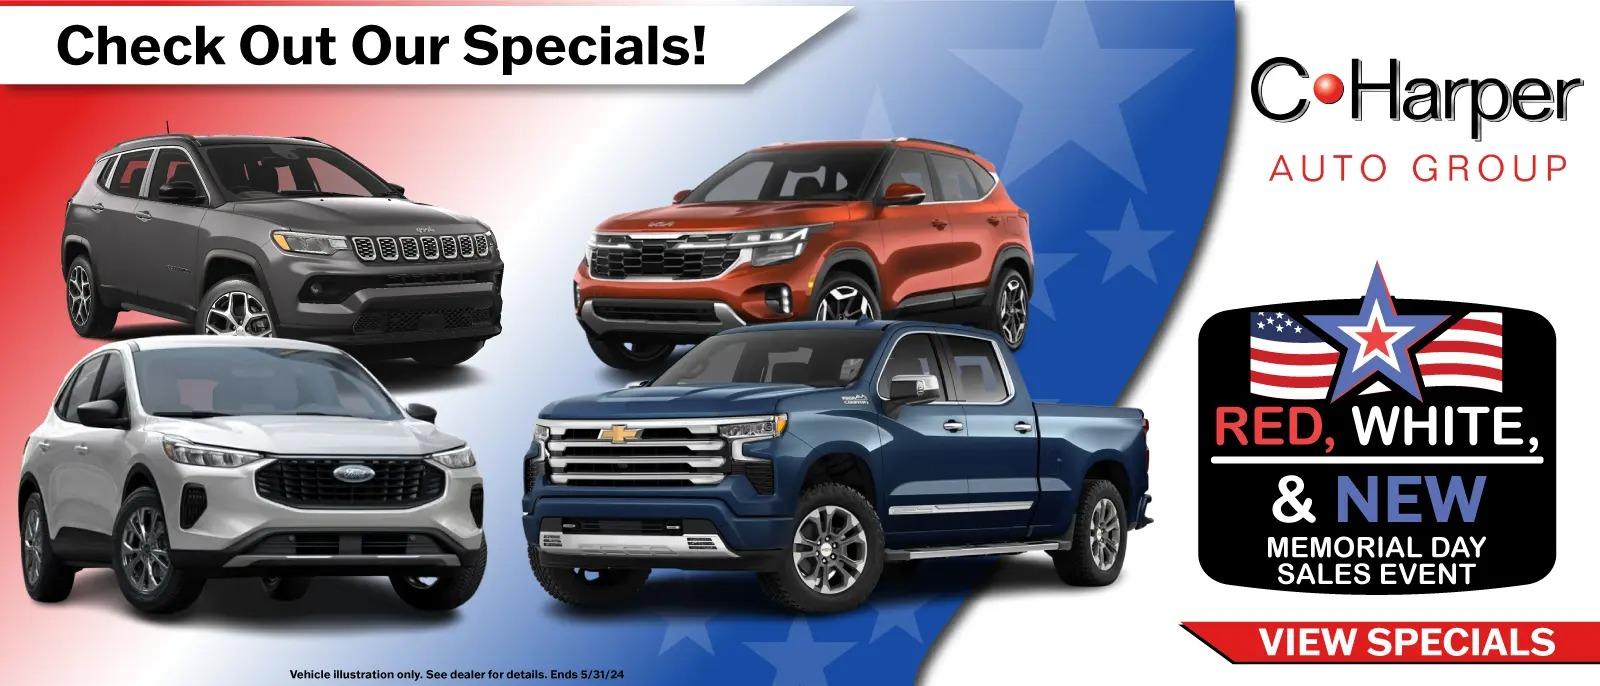 C Harper Auto Group | May Specials